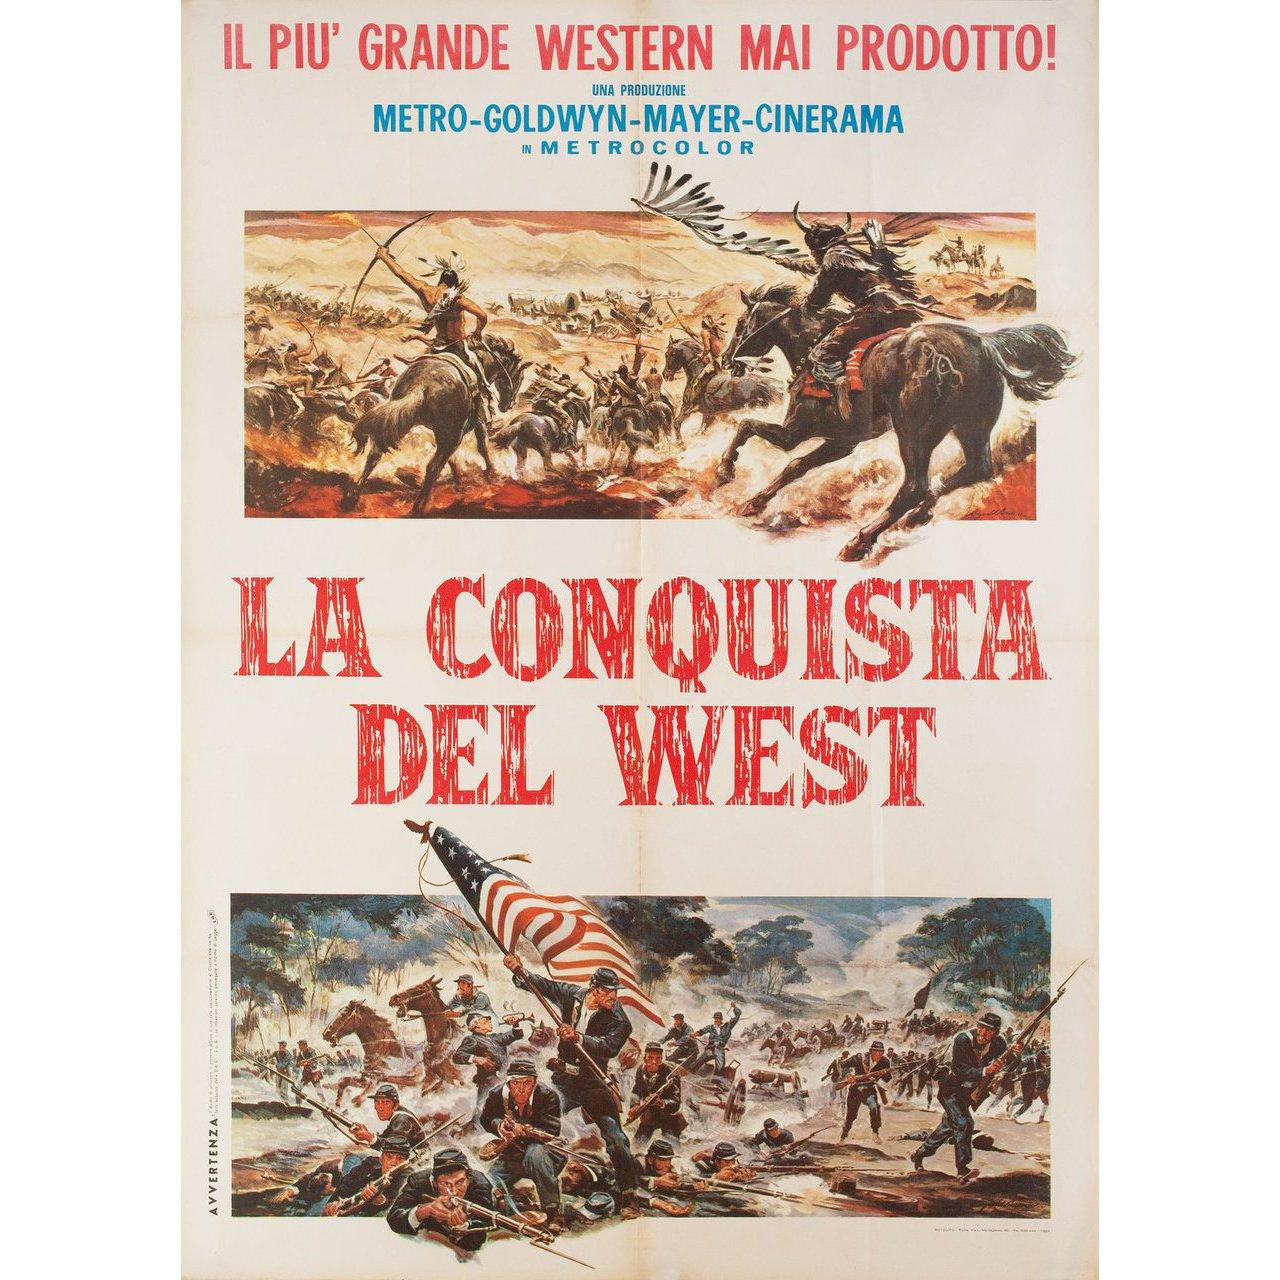 Original 1964 Italian due fogli poster by Reynold Brown for the film ‘How the West Was Won’ directed by John Ford / Henry Hathaway / George Marshall / Richard Thorpe with James Stewart / John Wayne / Gregory Peck / Carroll Baker / Lee J. Cobb /